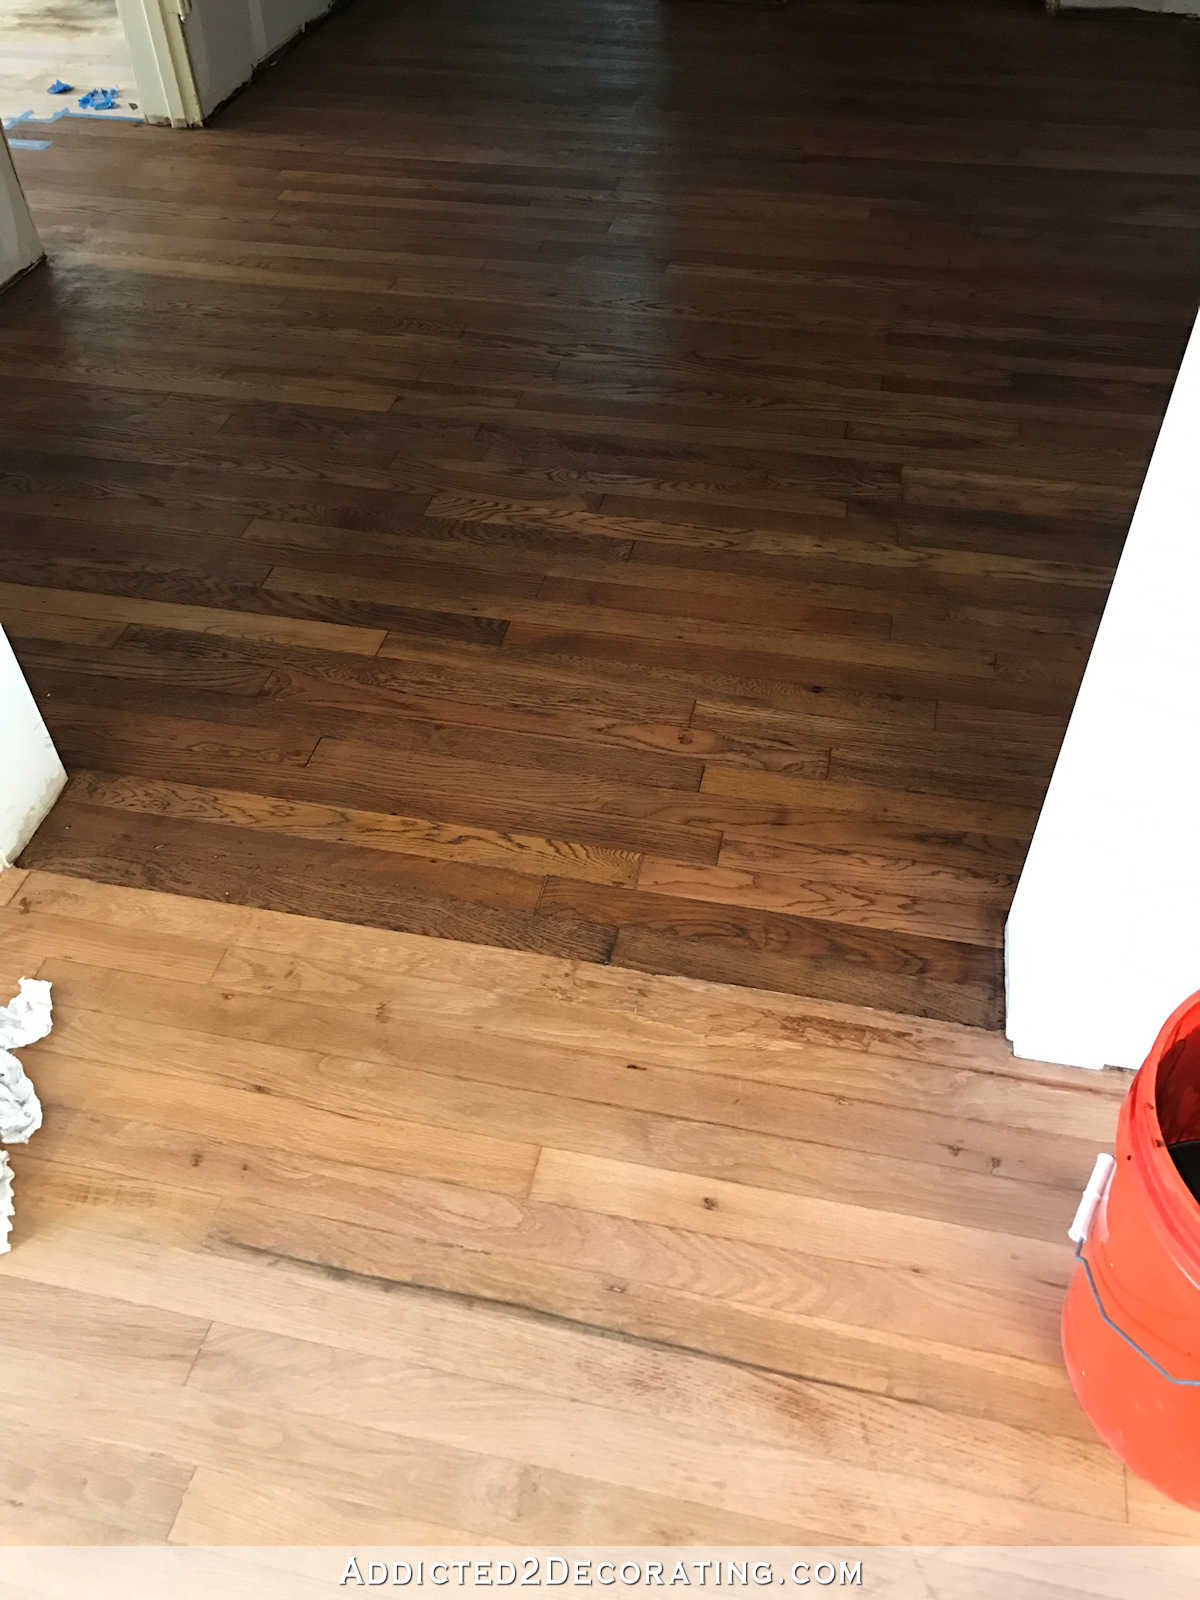 14 Lovable Hardwood Floor Finish Problems 2024 free download hardwood floor finish problems of adventures in staining my red oak hardwood floors products process in staining red oak hardwood floors 2 tape off one section at a time for